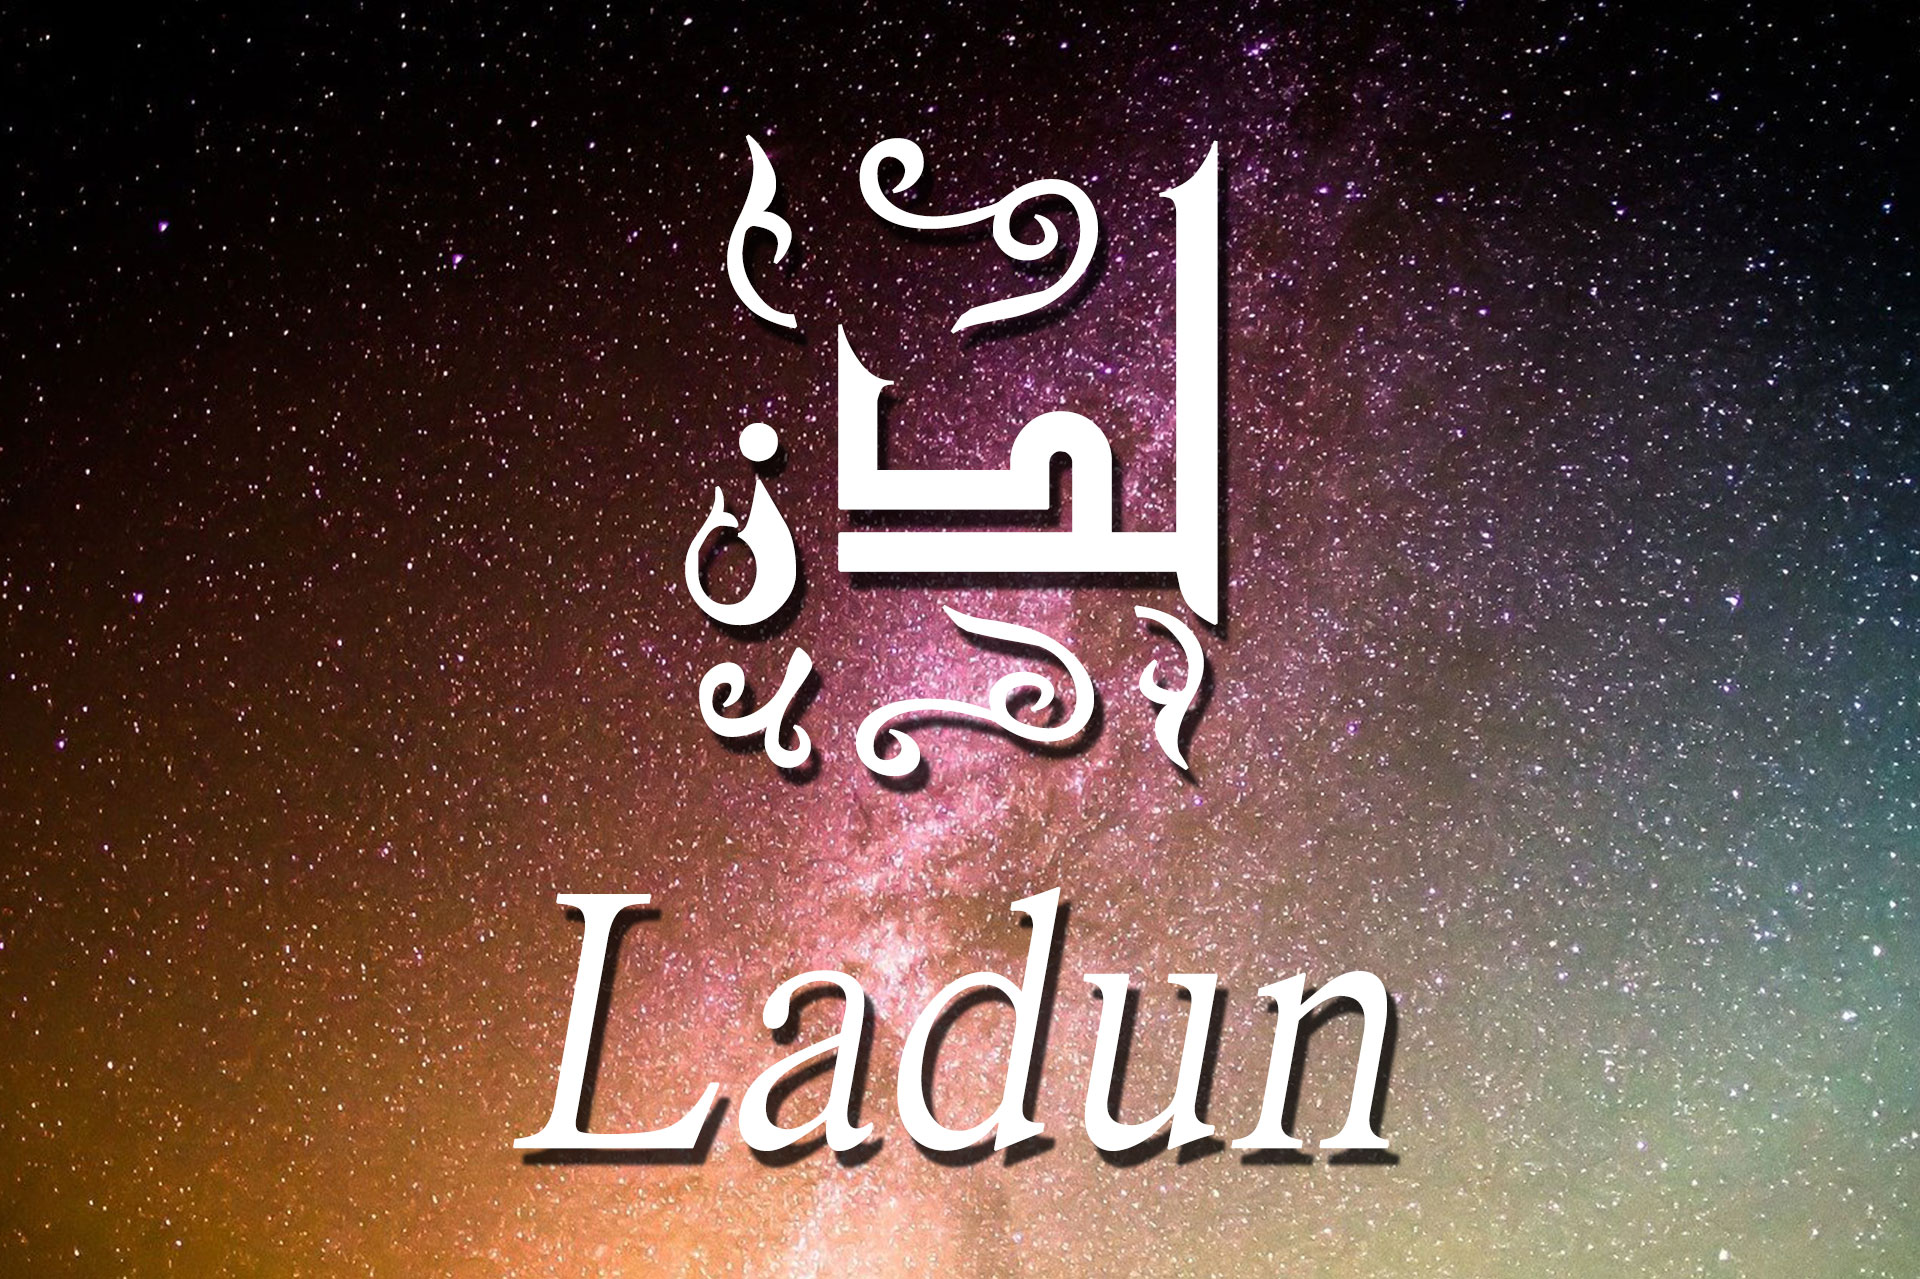 The Concept of “ladun” in the Qur’an